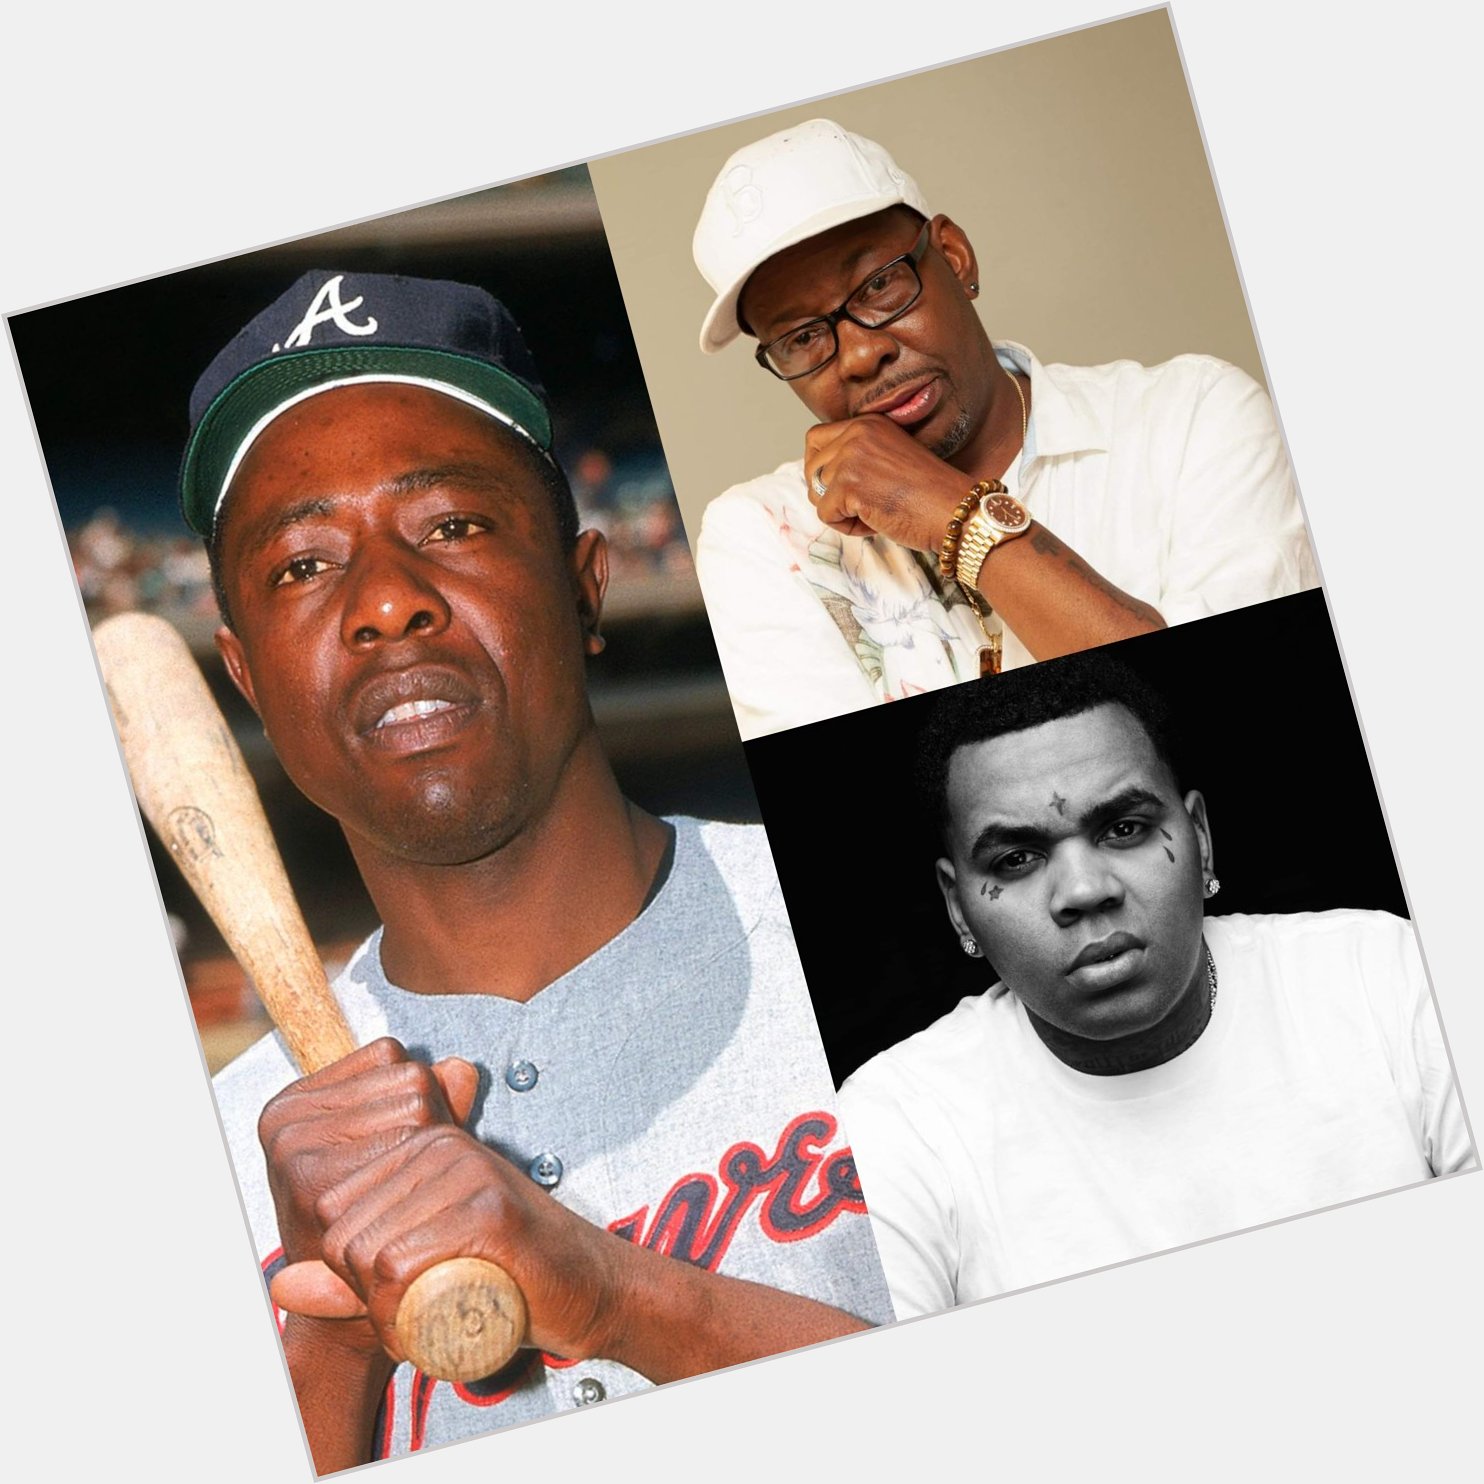 HAPPY BIRTHDAY HANK AARON (REST IN HEAVEN), BOBBY BROWN & KEVIN GATES. 